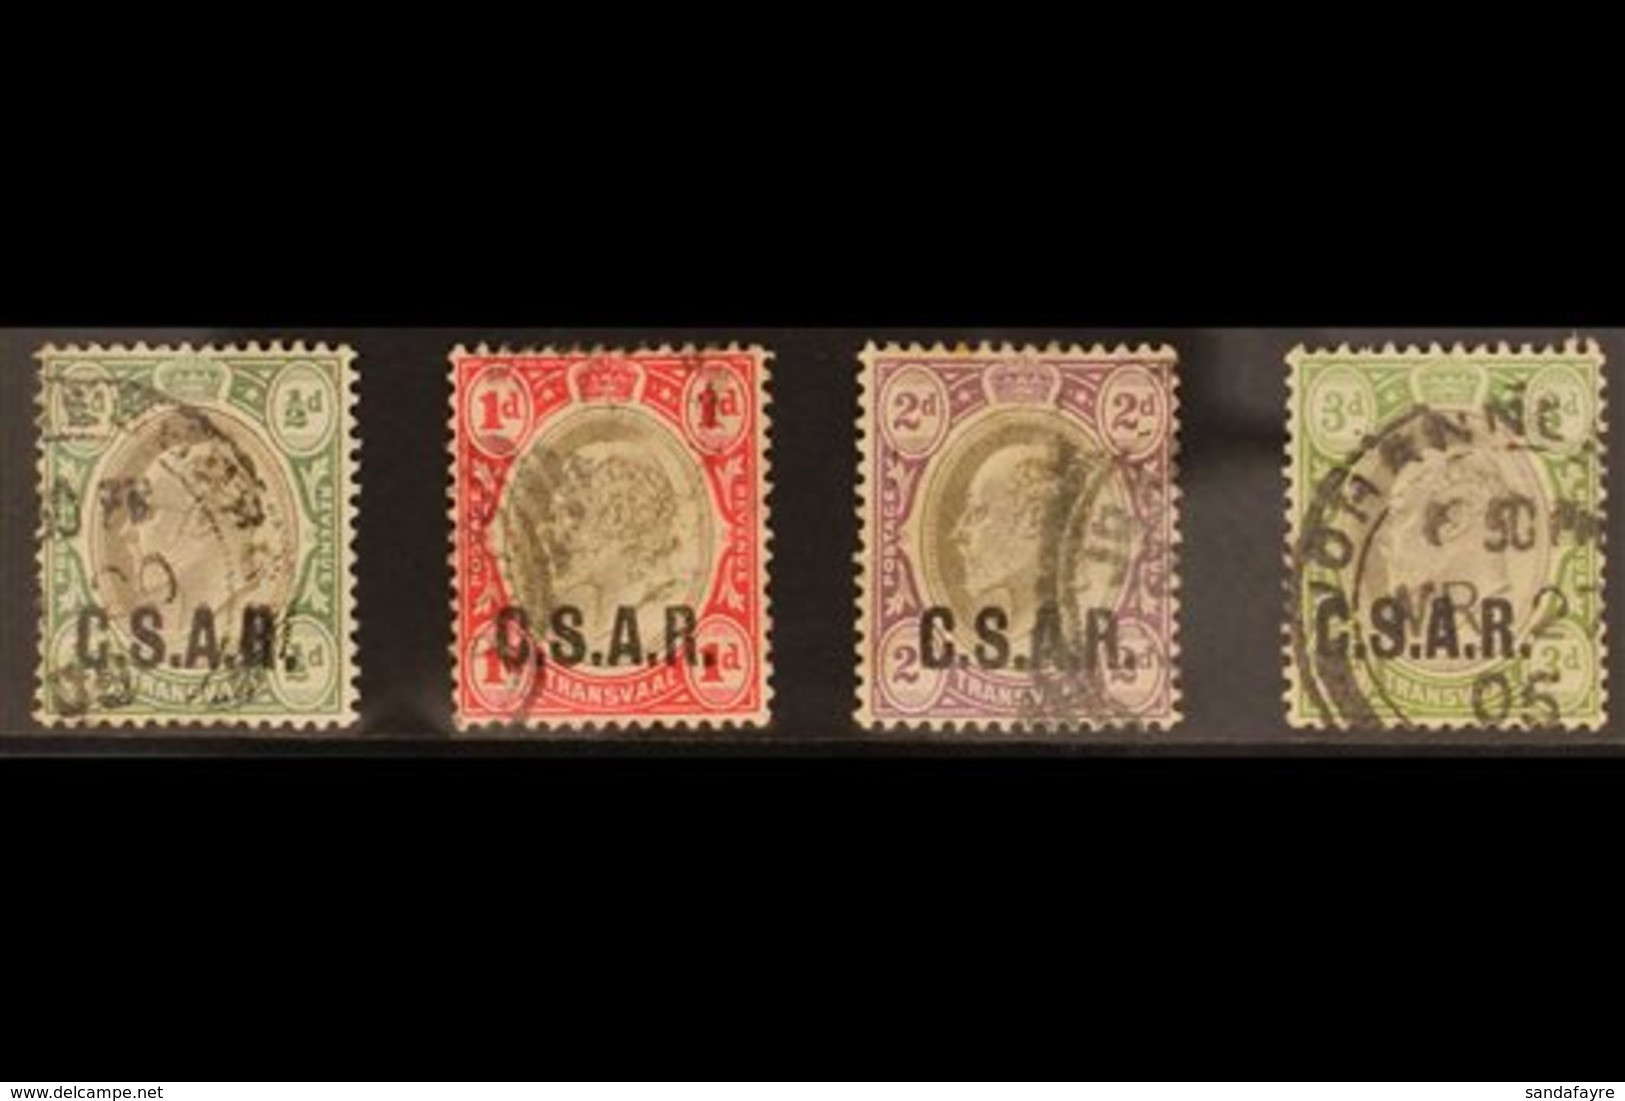 TRANSVAAL  RAILWAY OFFICIAL STAMPS 1905 ½d, 1d, 2d, And 3d With "C.S.A.R." Overprints, SG RO3/RO6, Fine Used. (4 Stamps) - Non Classificati